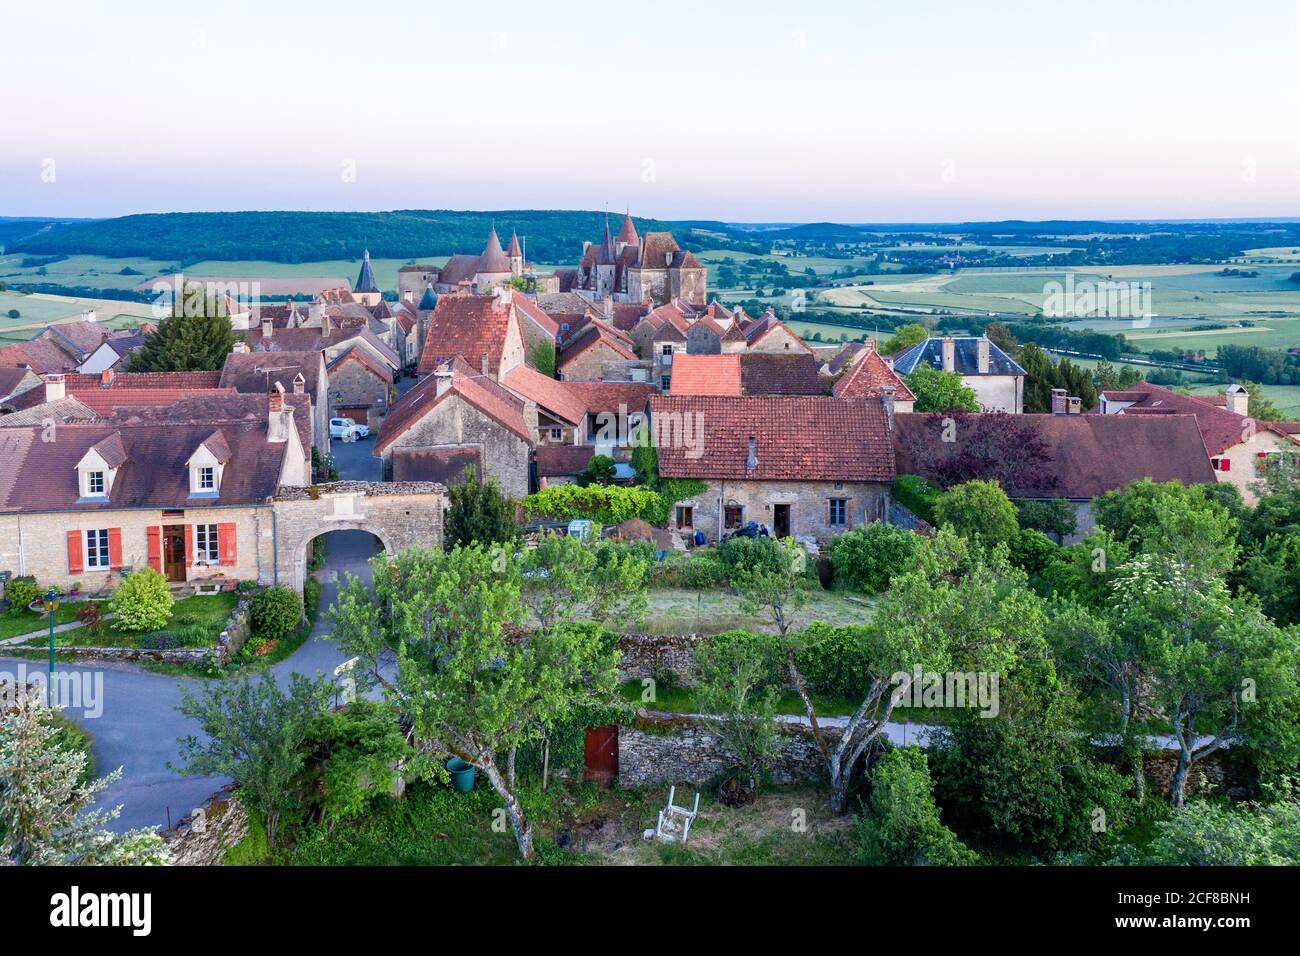 France, Cote d'Or, Chateauneuf, labelled Les Plus Beaux Villages de France (The Most Beautiful Villages of France), general view of the viilage (aeria Stock Photo